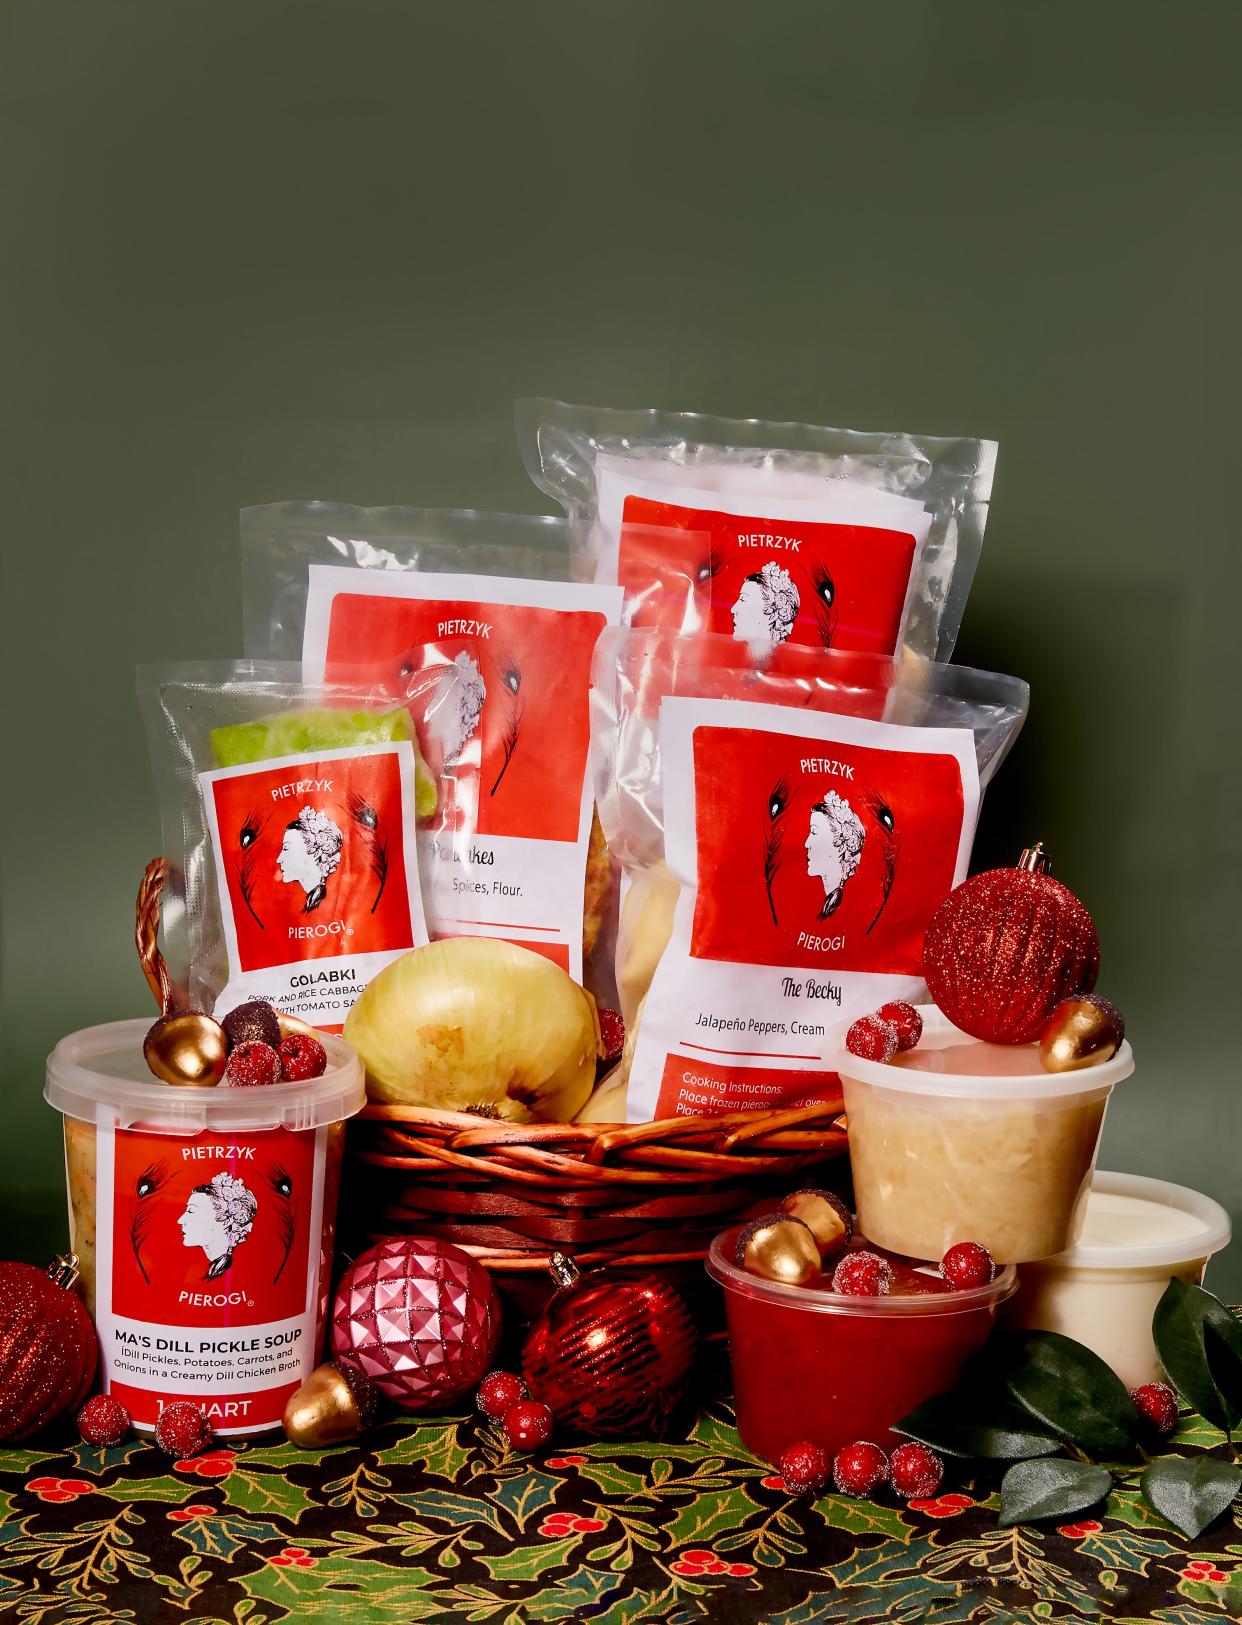 Pietrzyk Pierogi offers a huge variety of its pierogi for mall order as well ask gift baskets.